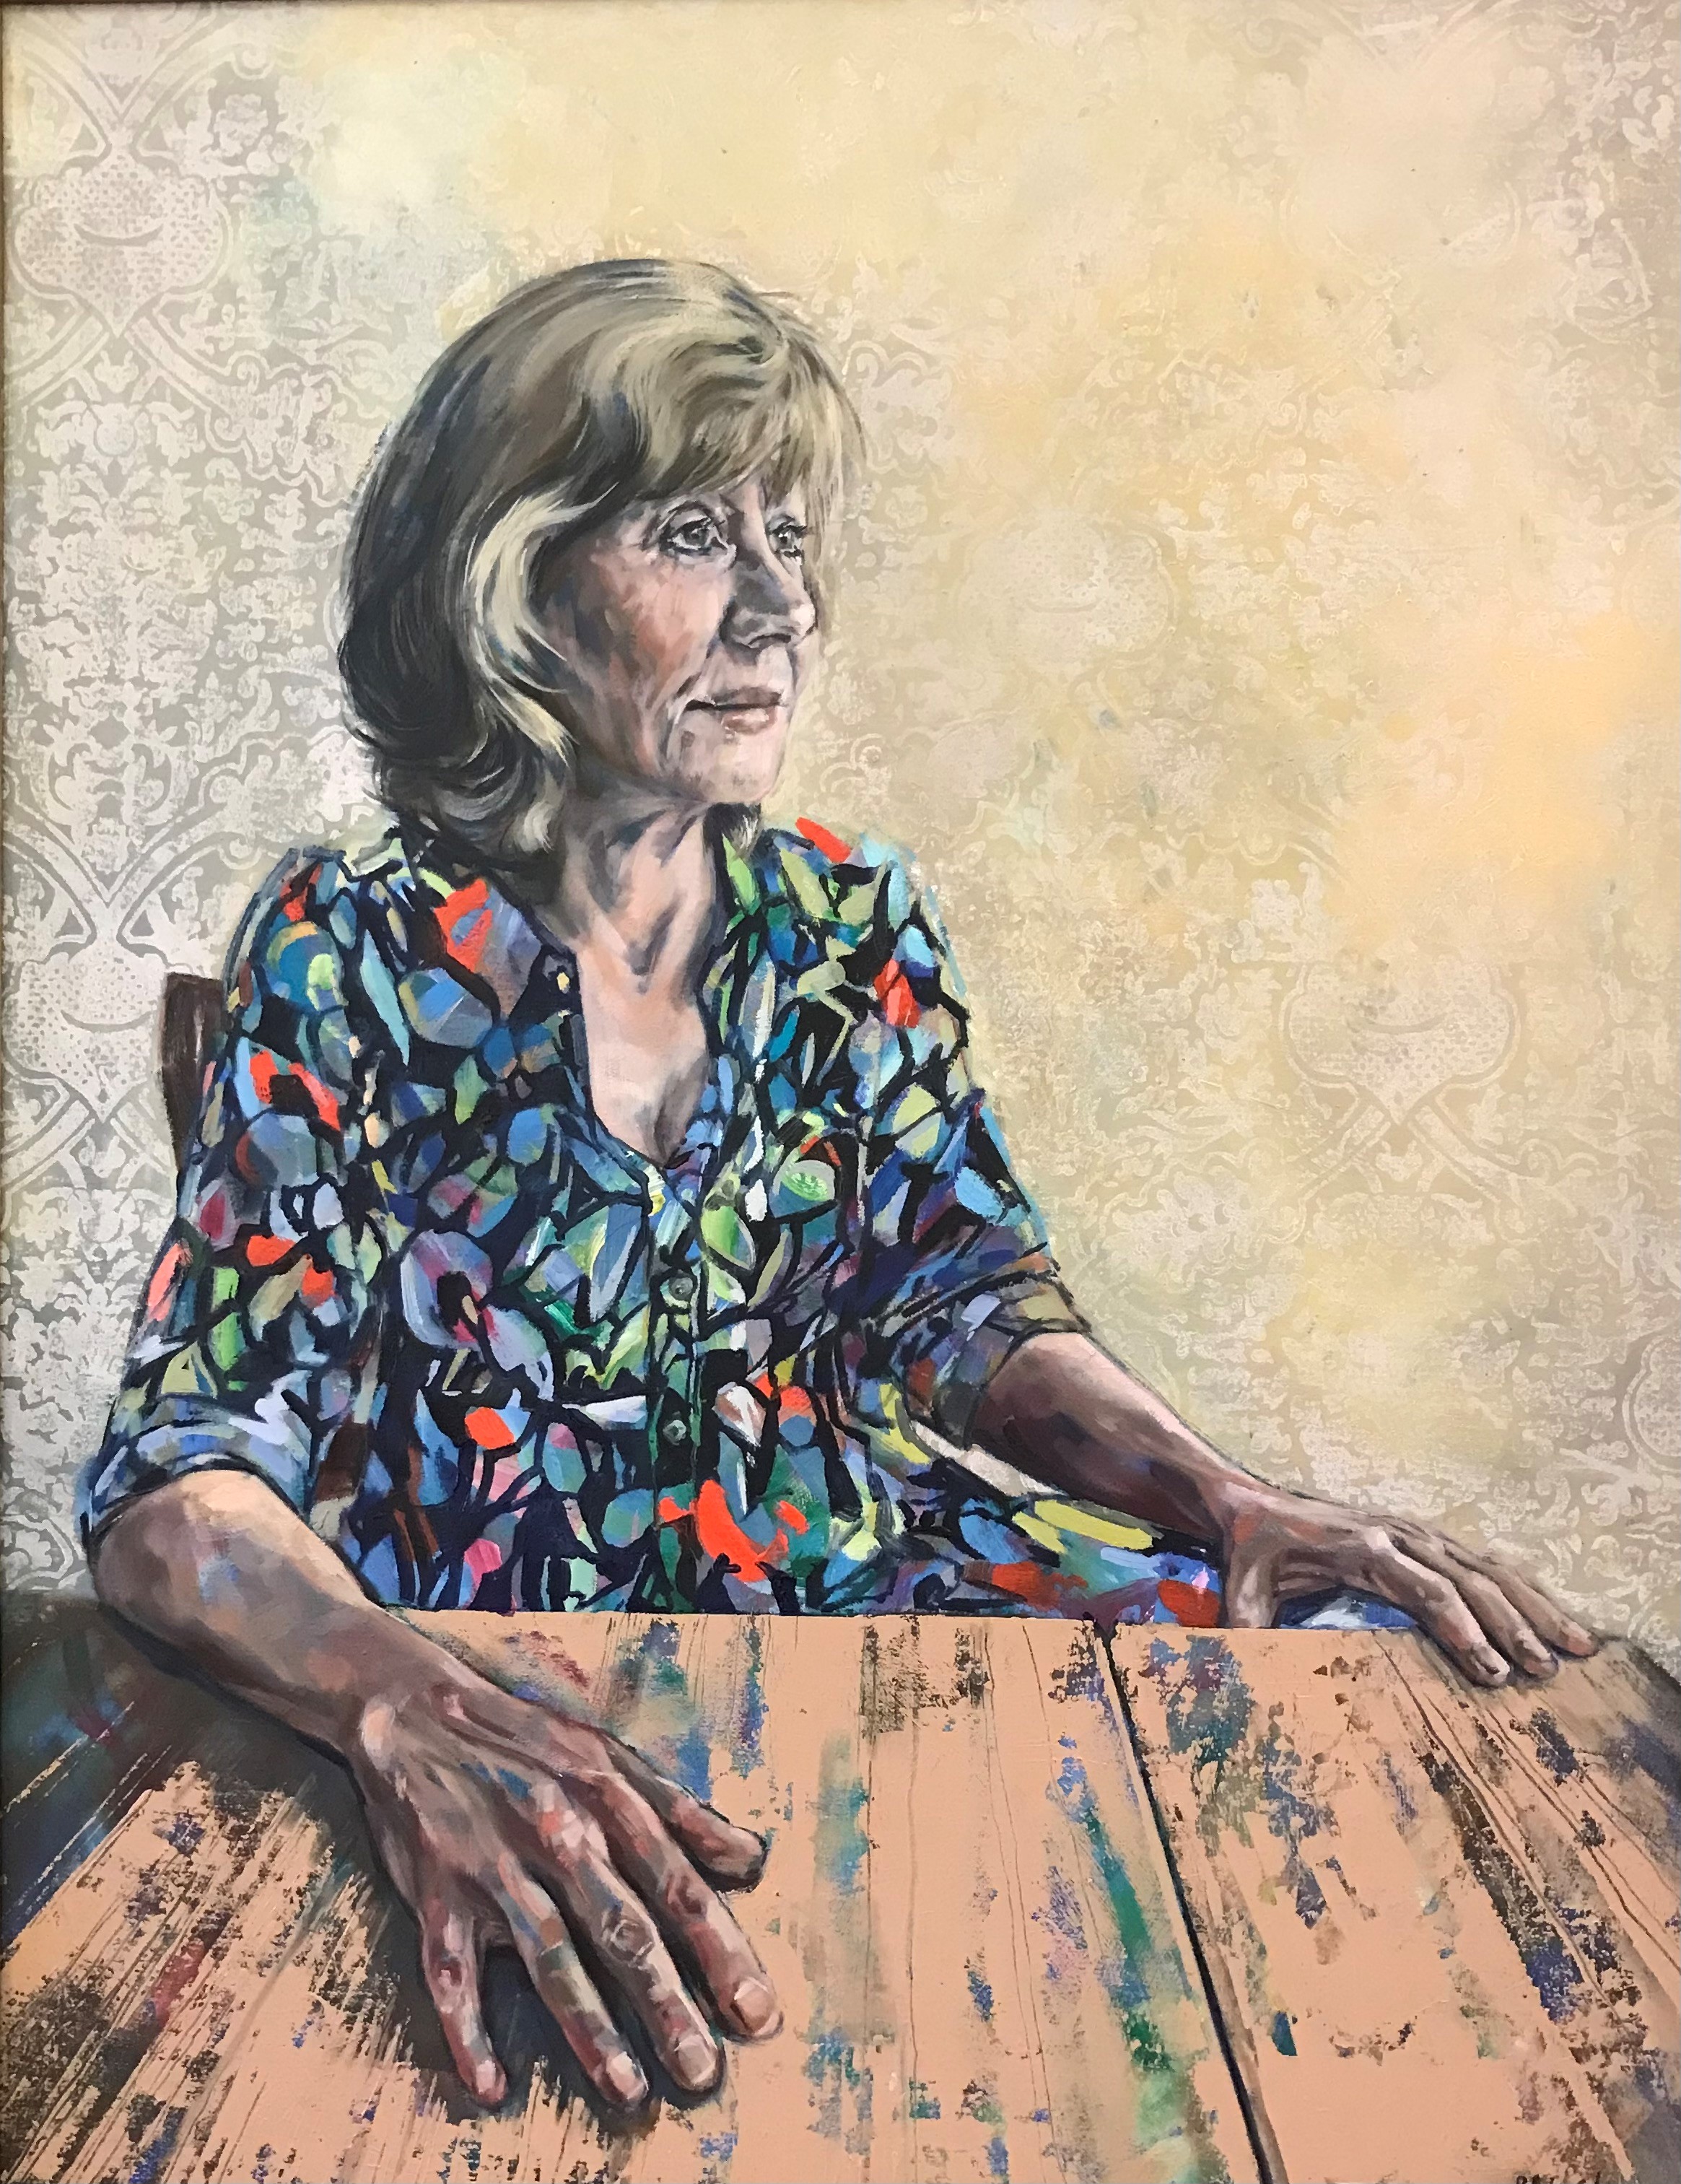 A portrait of a woman wearing a brightly coloured dress sitting at a wooden table